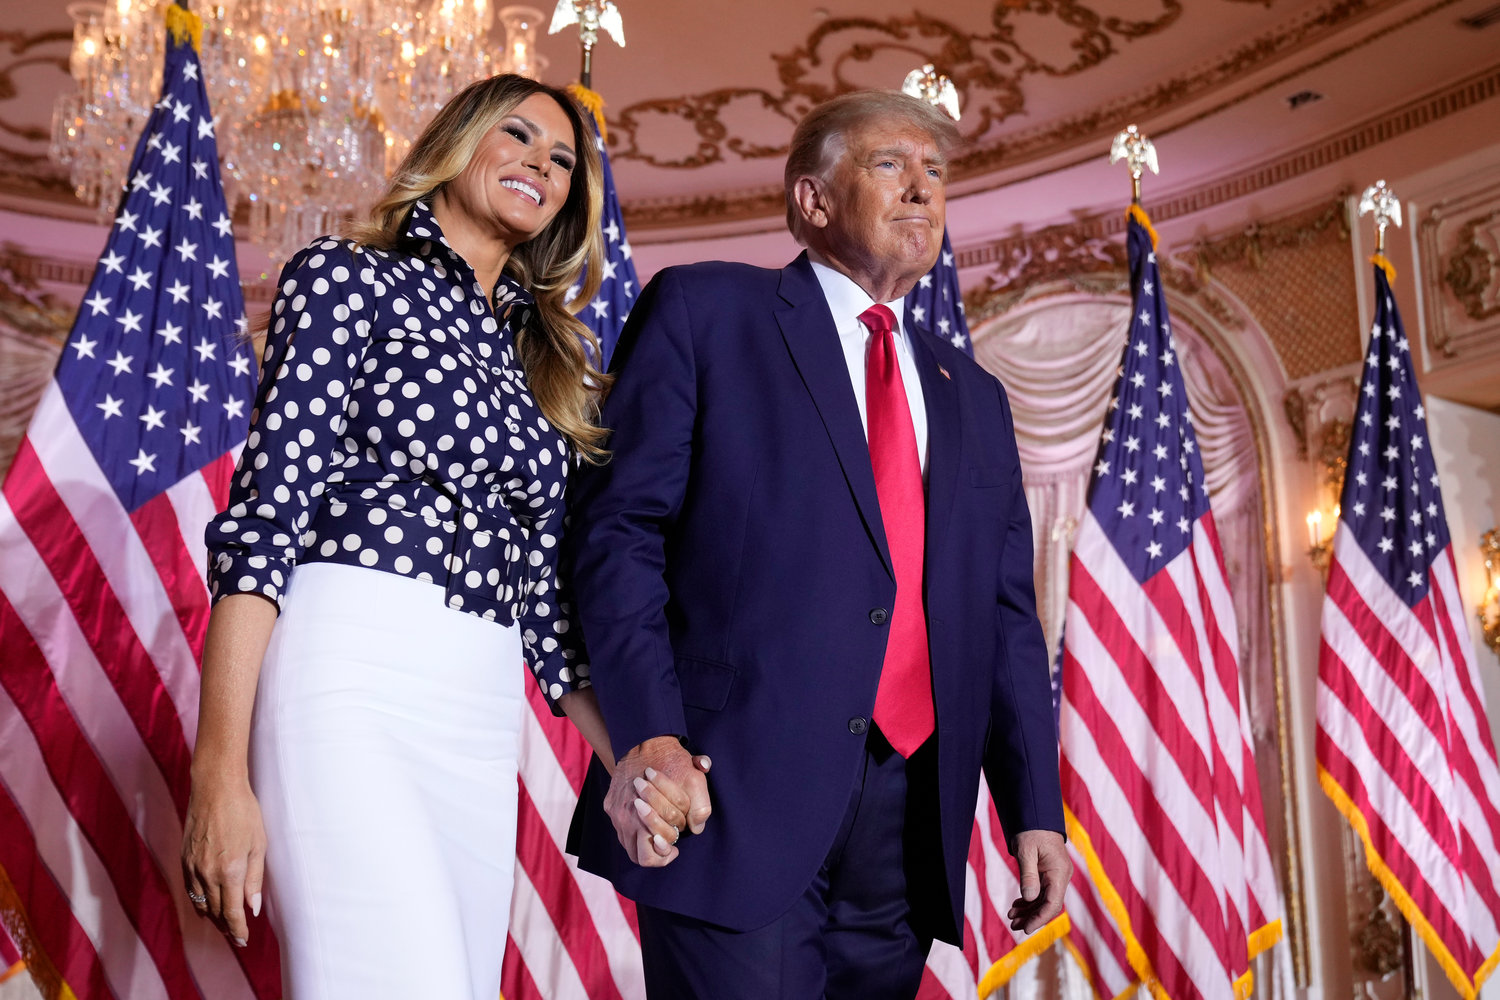 Former President Donald Trump stands on stage with former first lady Melania Trump after he announced a run for president for the third time at Mar-a-Lago in Palm Beach, Fla., Nov. 15, 2022. Trump has spent years teasing the prospect of another presidential run. But in the first week since announcing his third bid for the White House, he's done little to suggest that he's organizing a traditional campaign. (AP Photo/Andrew Harnik, File)